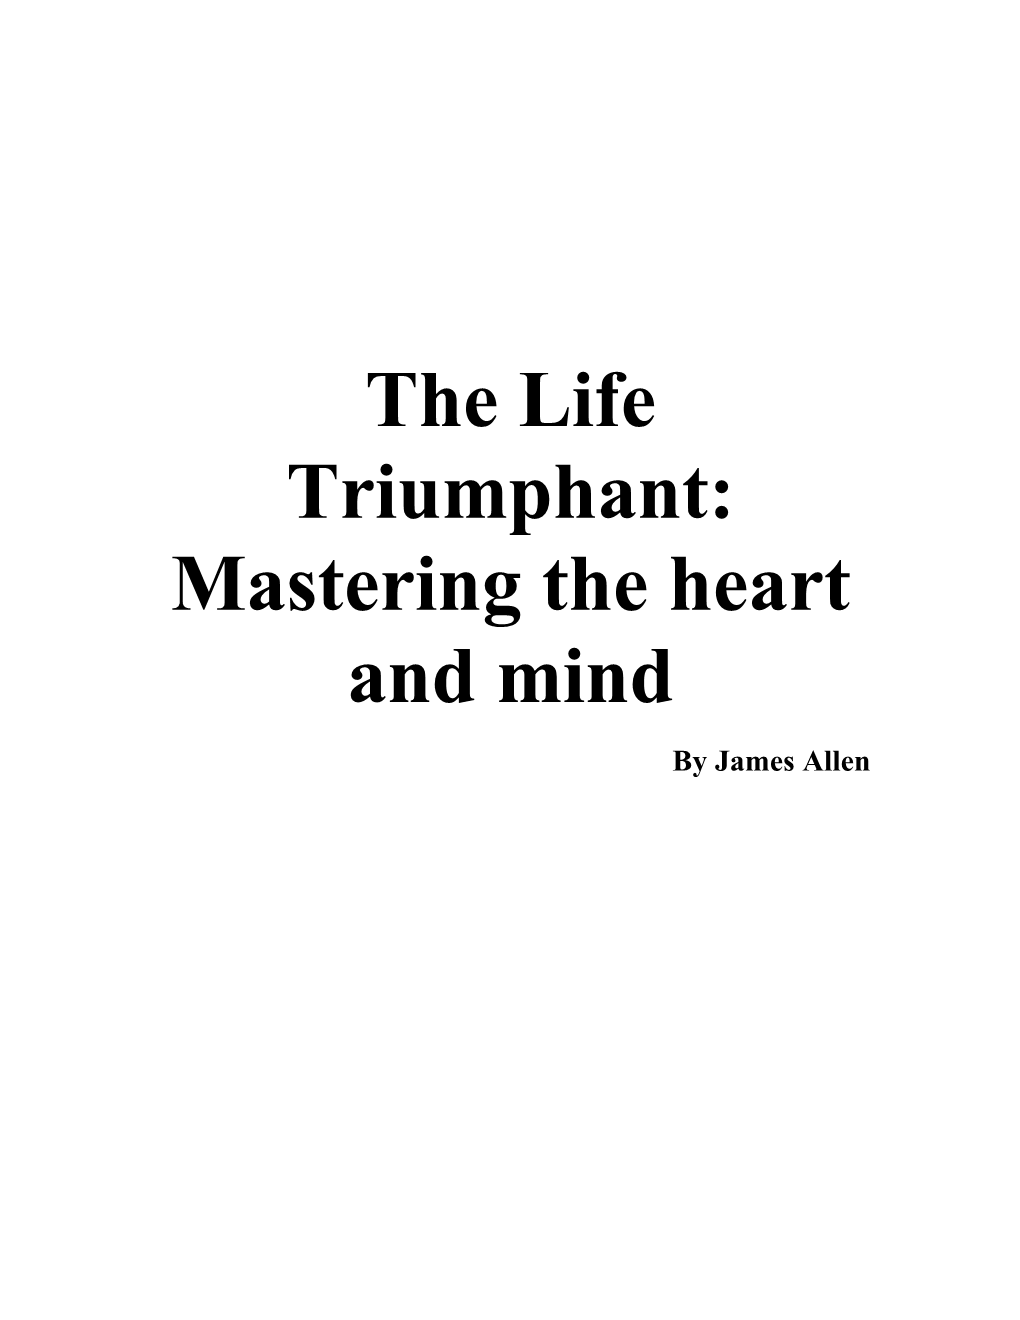 The Life Triumphant: Mastering the Heart and Mind by James Allen